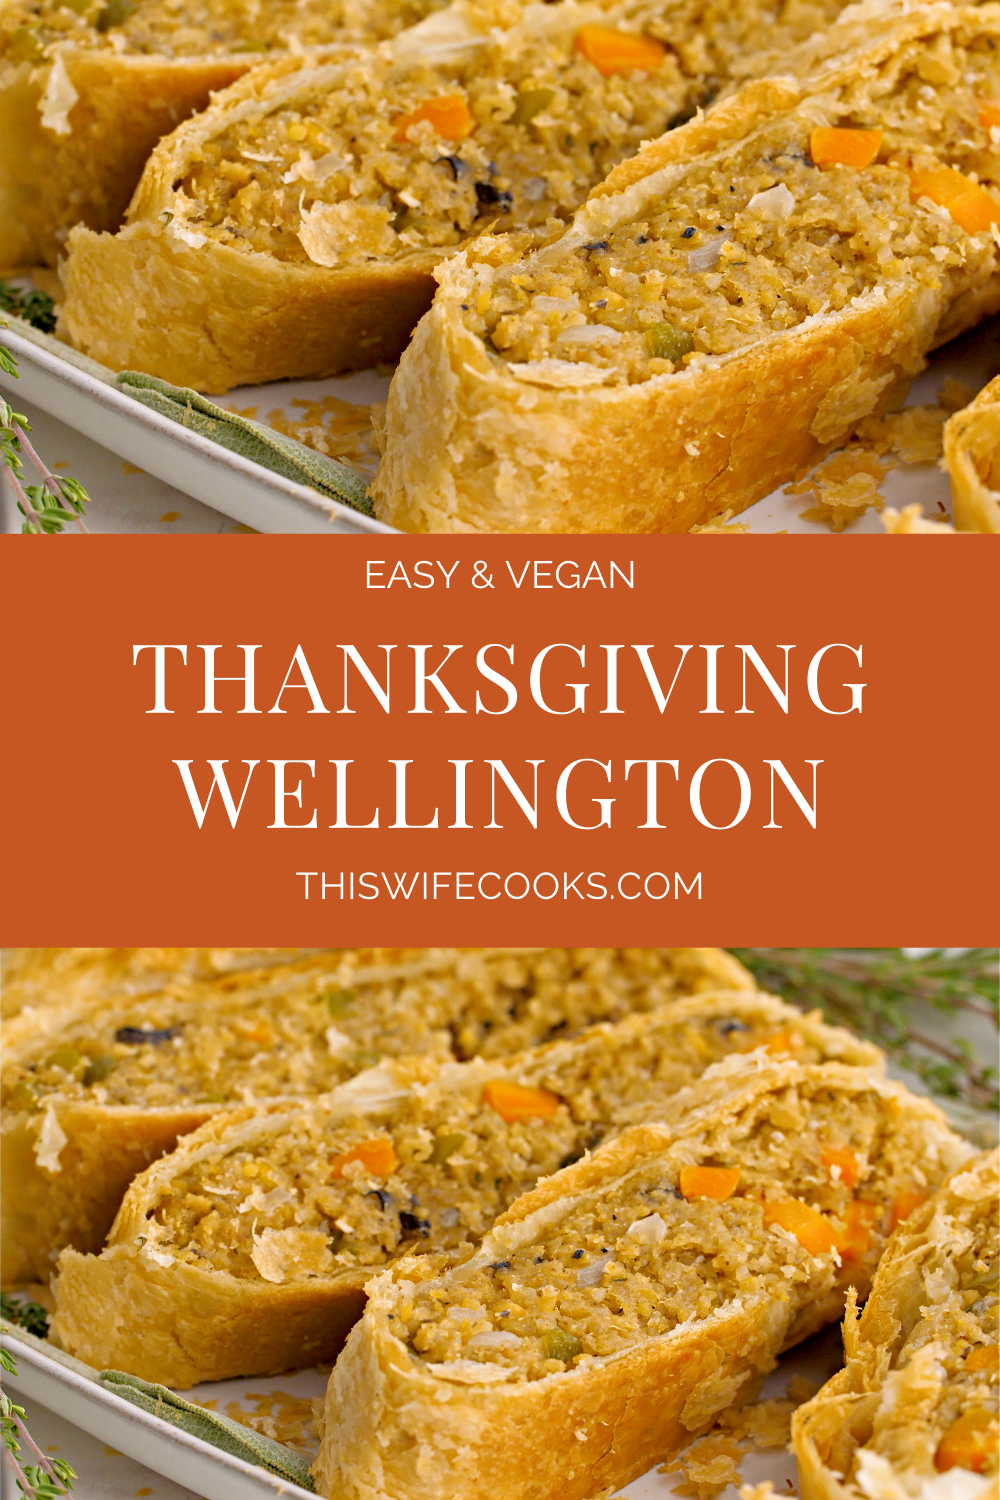 Vegan Thanksgiving Wellington - Loaded with savory quinoa, garbanzo beans, & veggies, then wrapped & baked in puff pastry. Loved by vegans and meat-eaters alike!  via @thiswifecooks